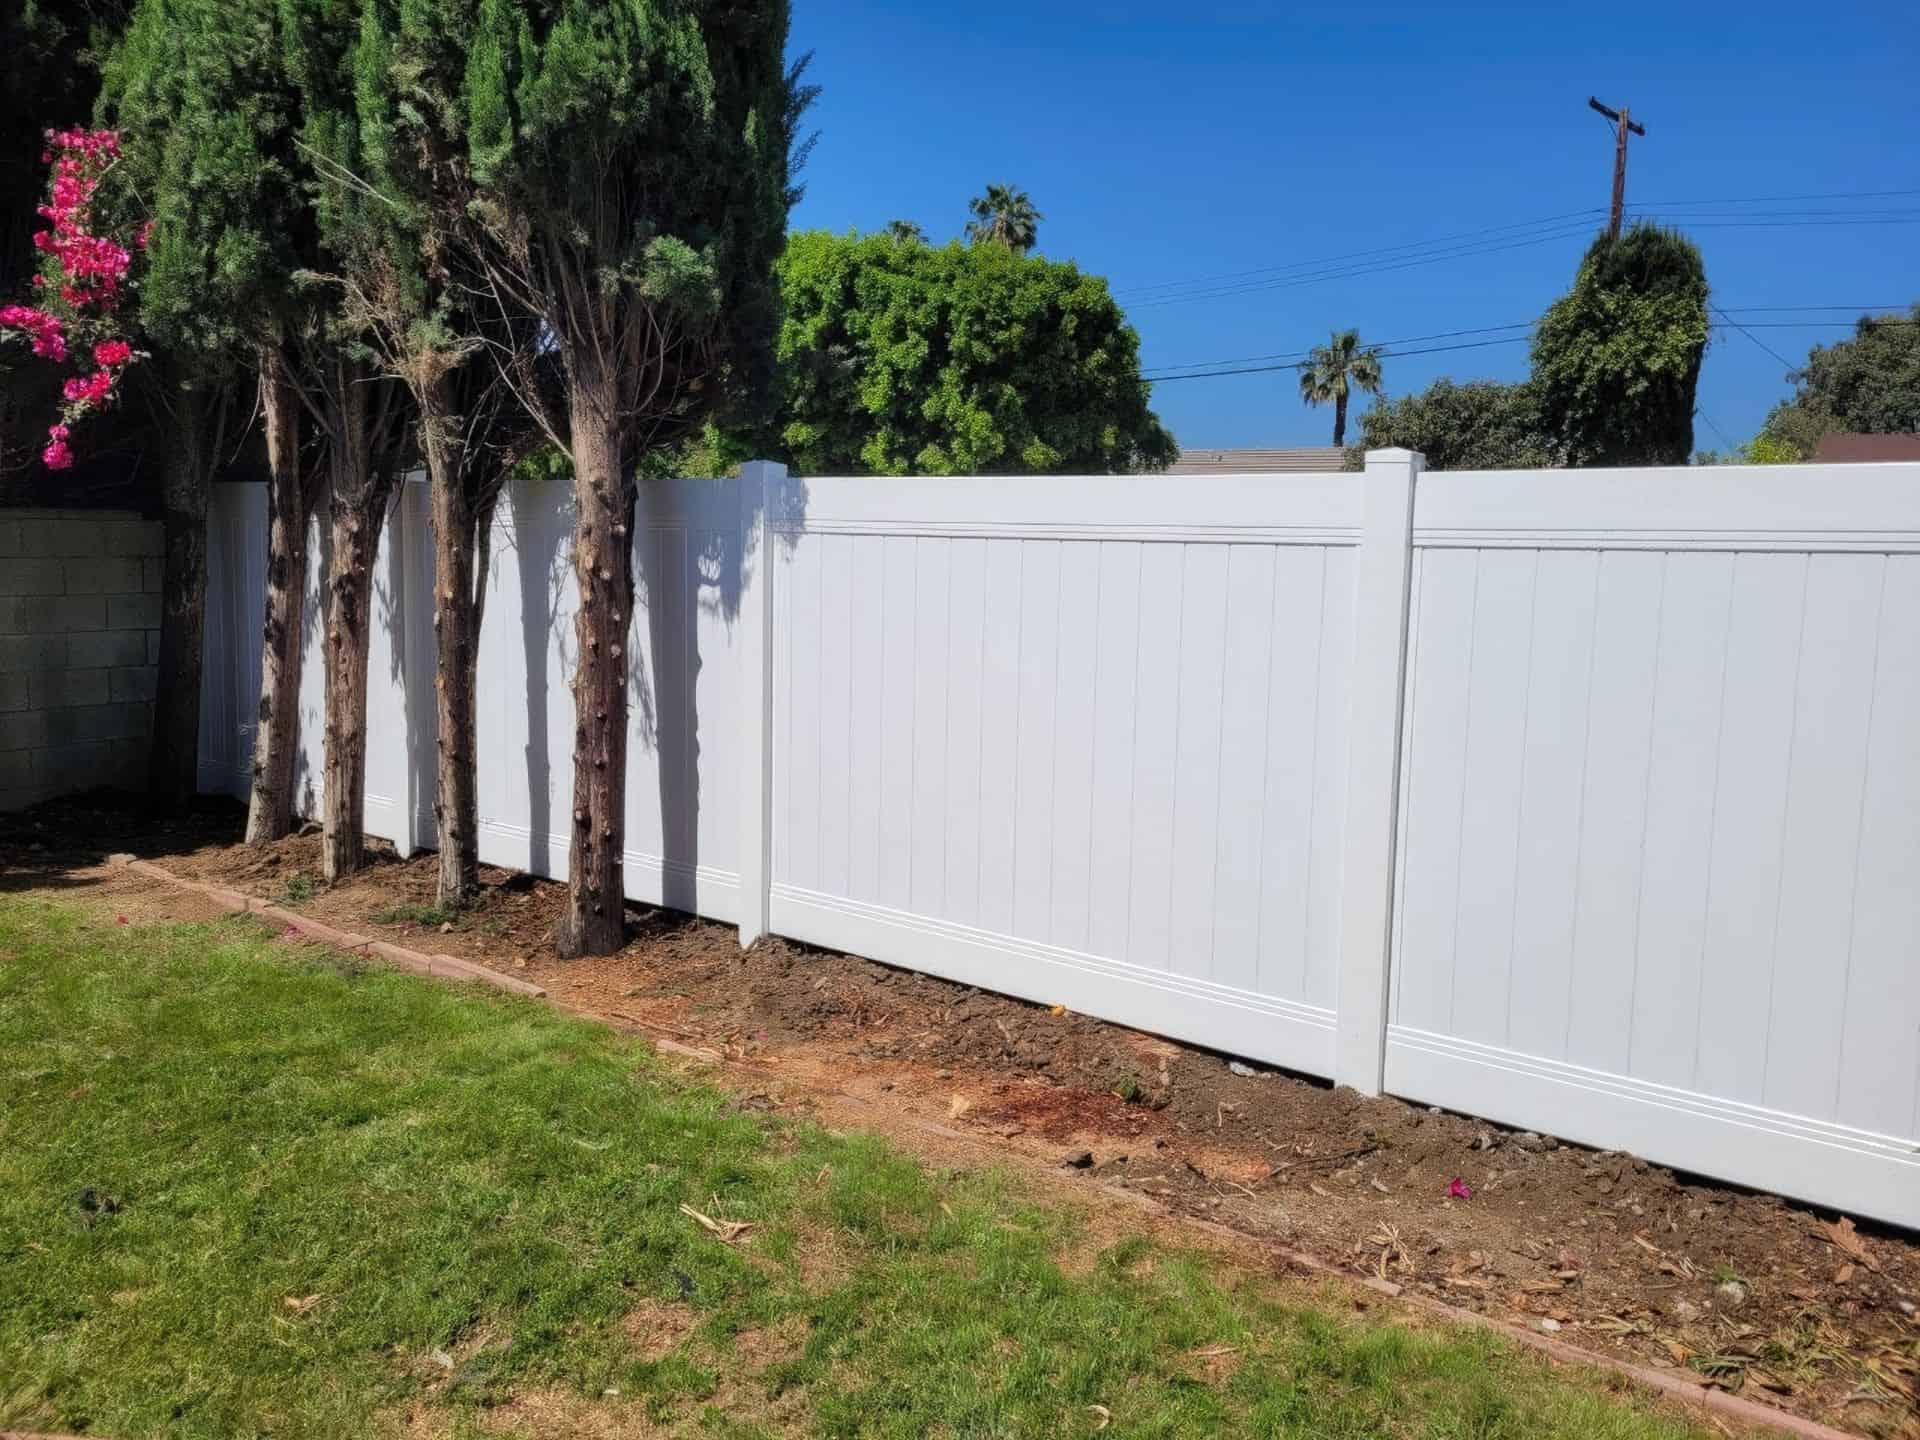 Vinyl privacy fence with behind small garden boundary with long trees at the corner of grassy lawn connecting to the house